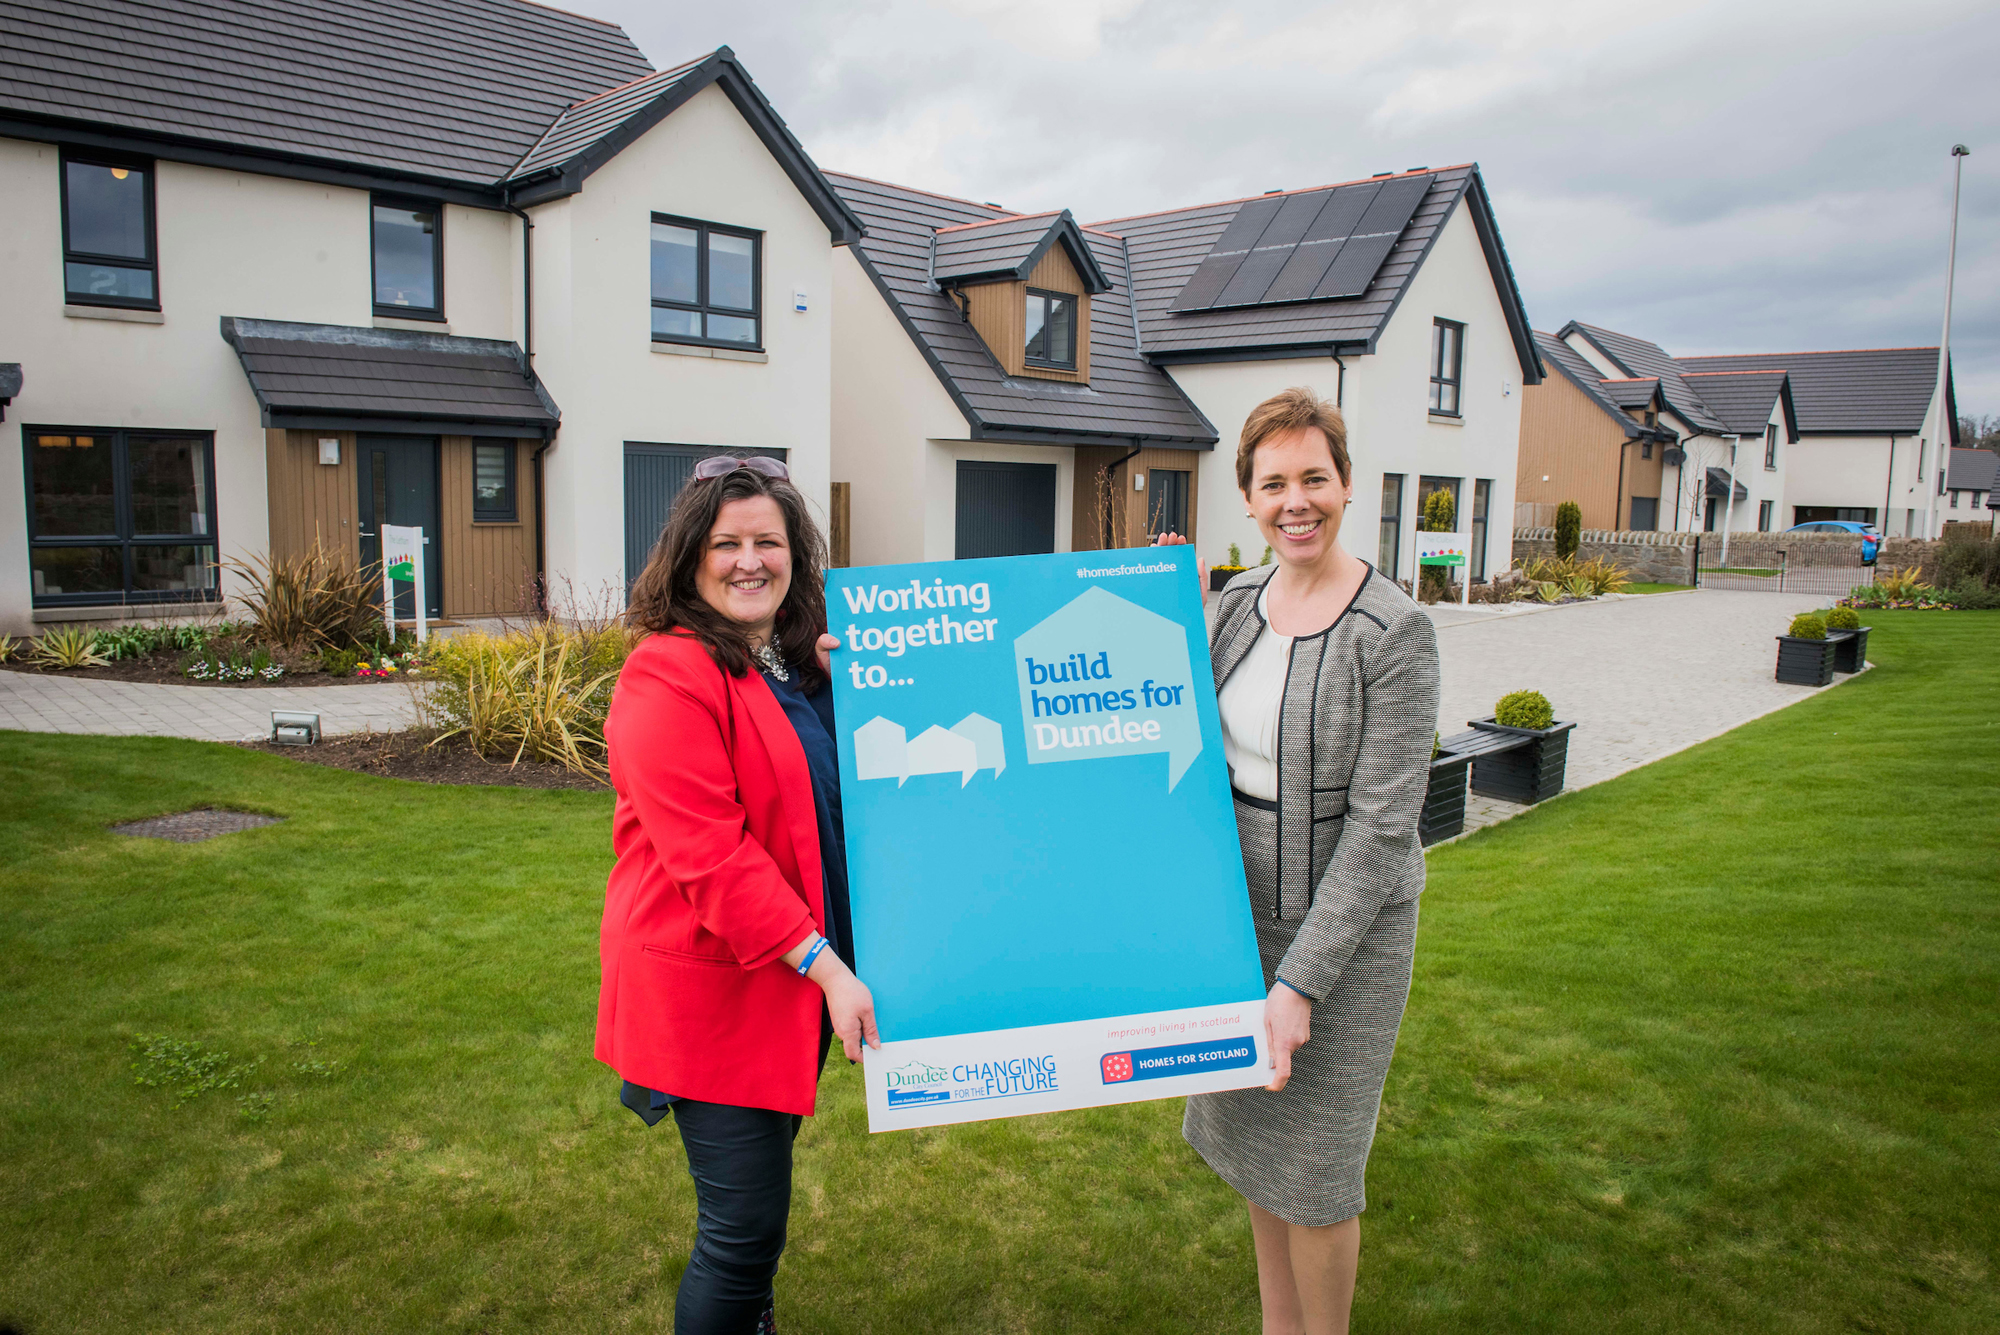 Council and homebuilders to work together to meet housing needs of Dundonians